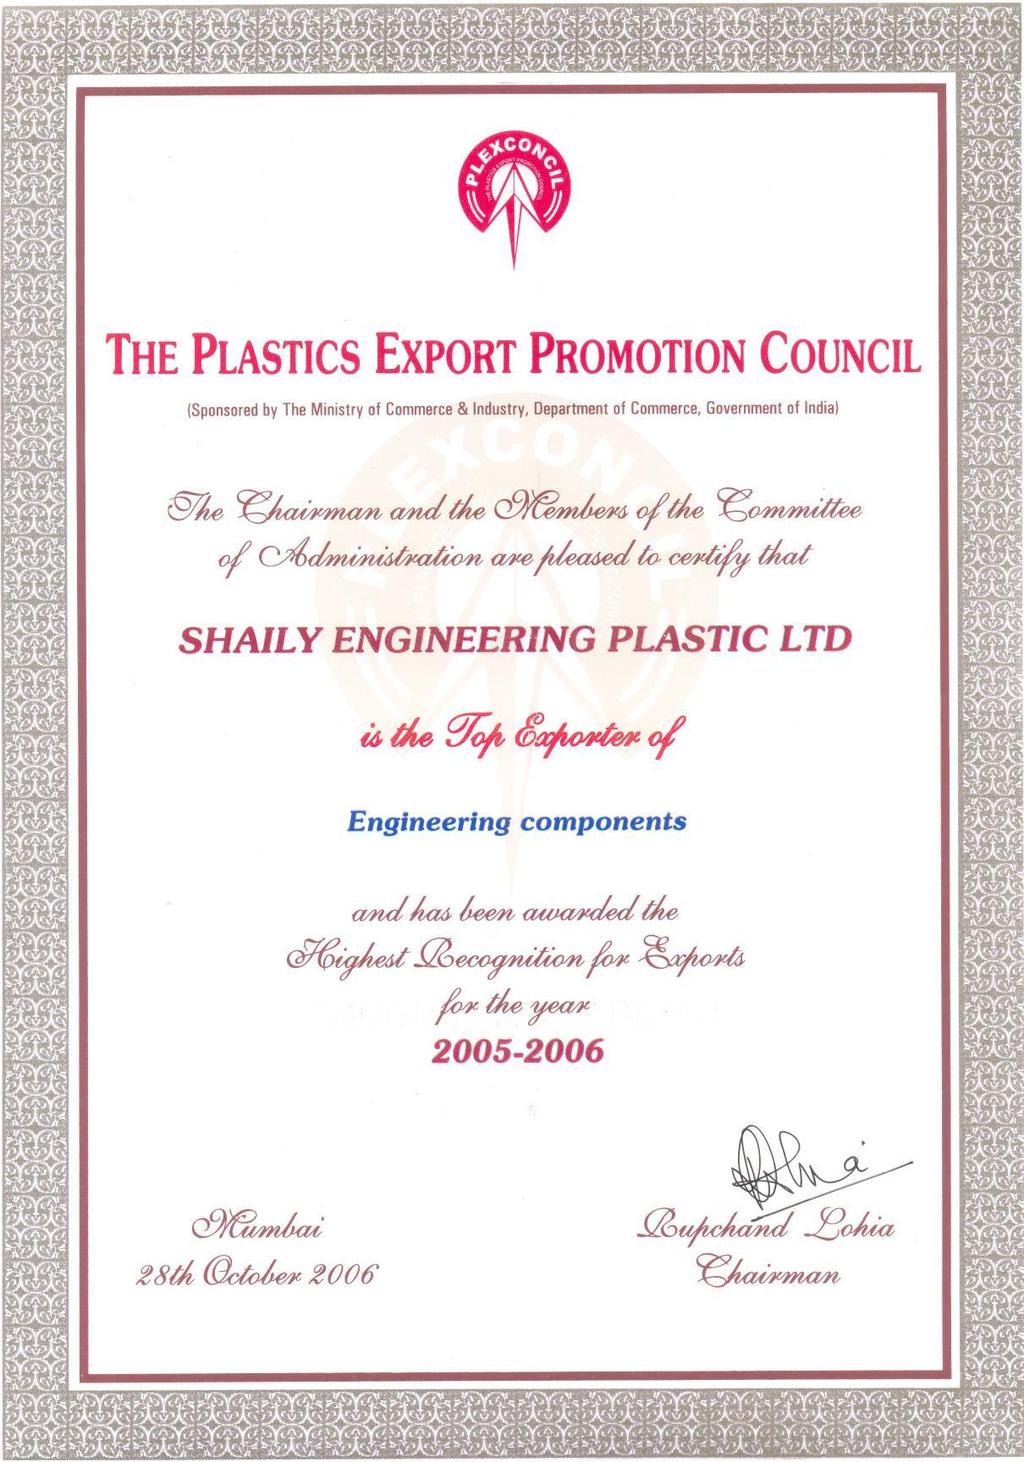 Export House Awards Top Exporter of Engineering Components for